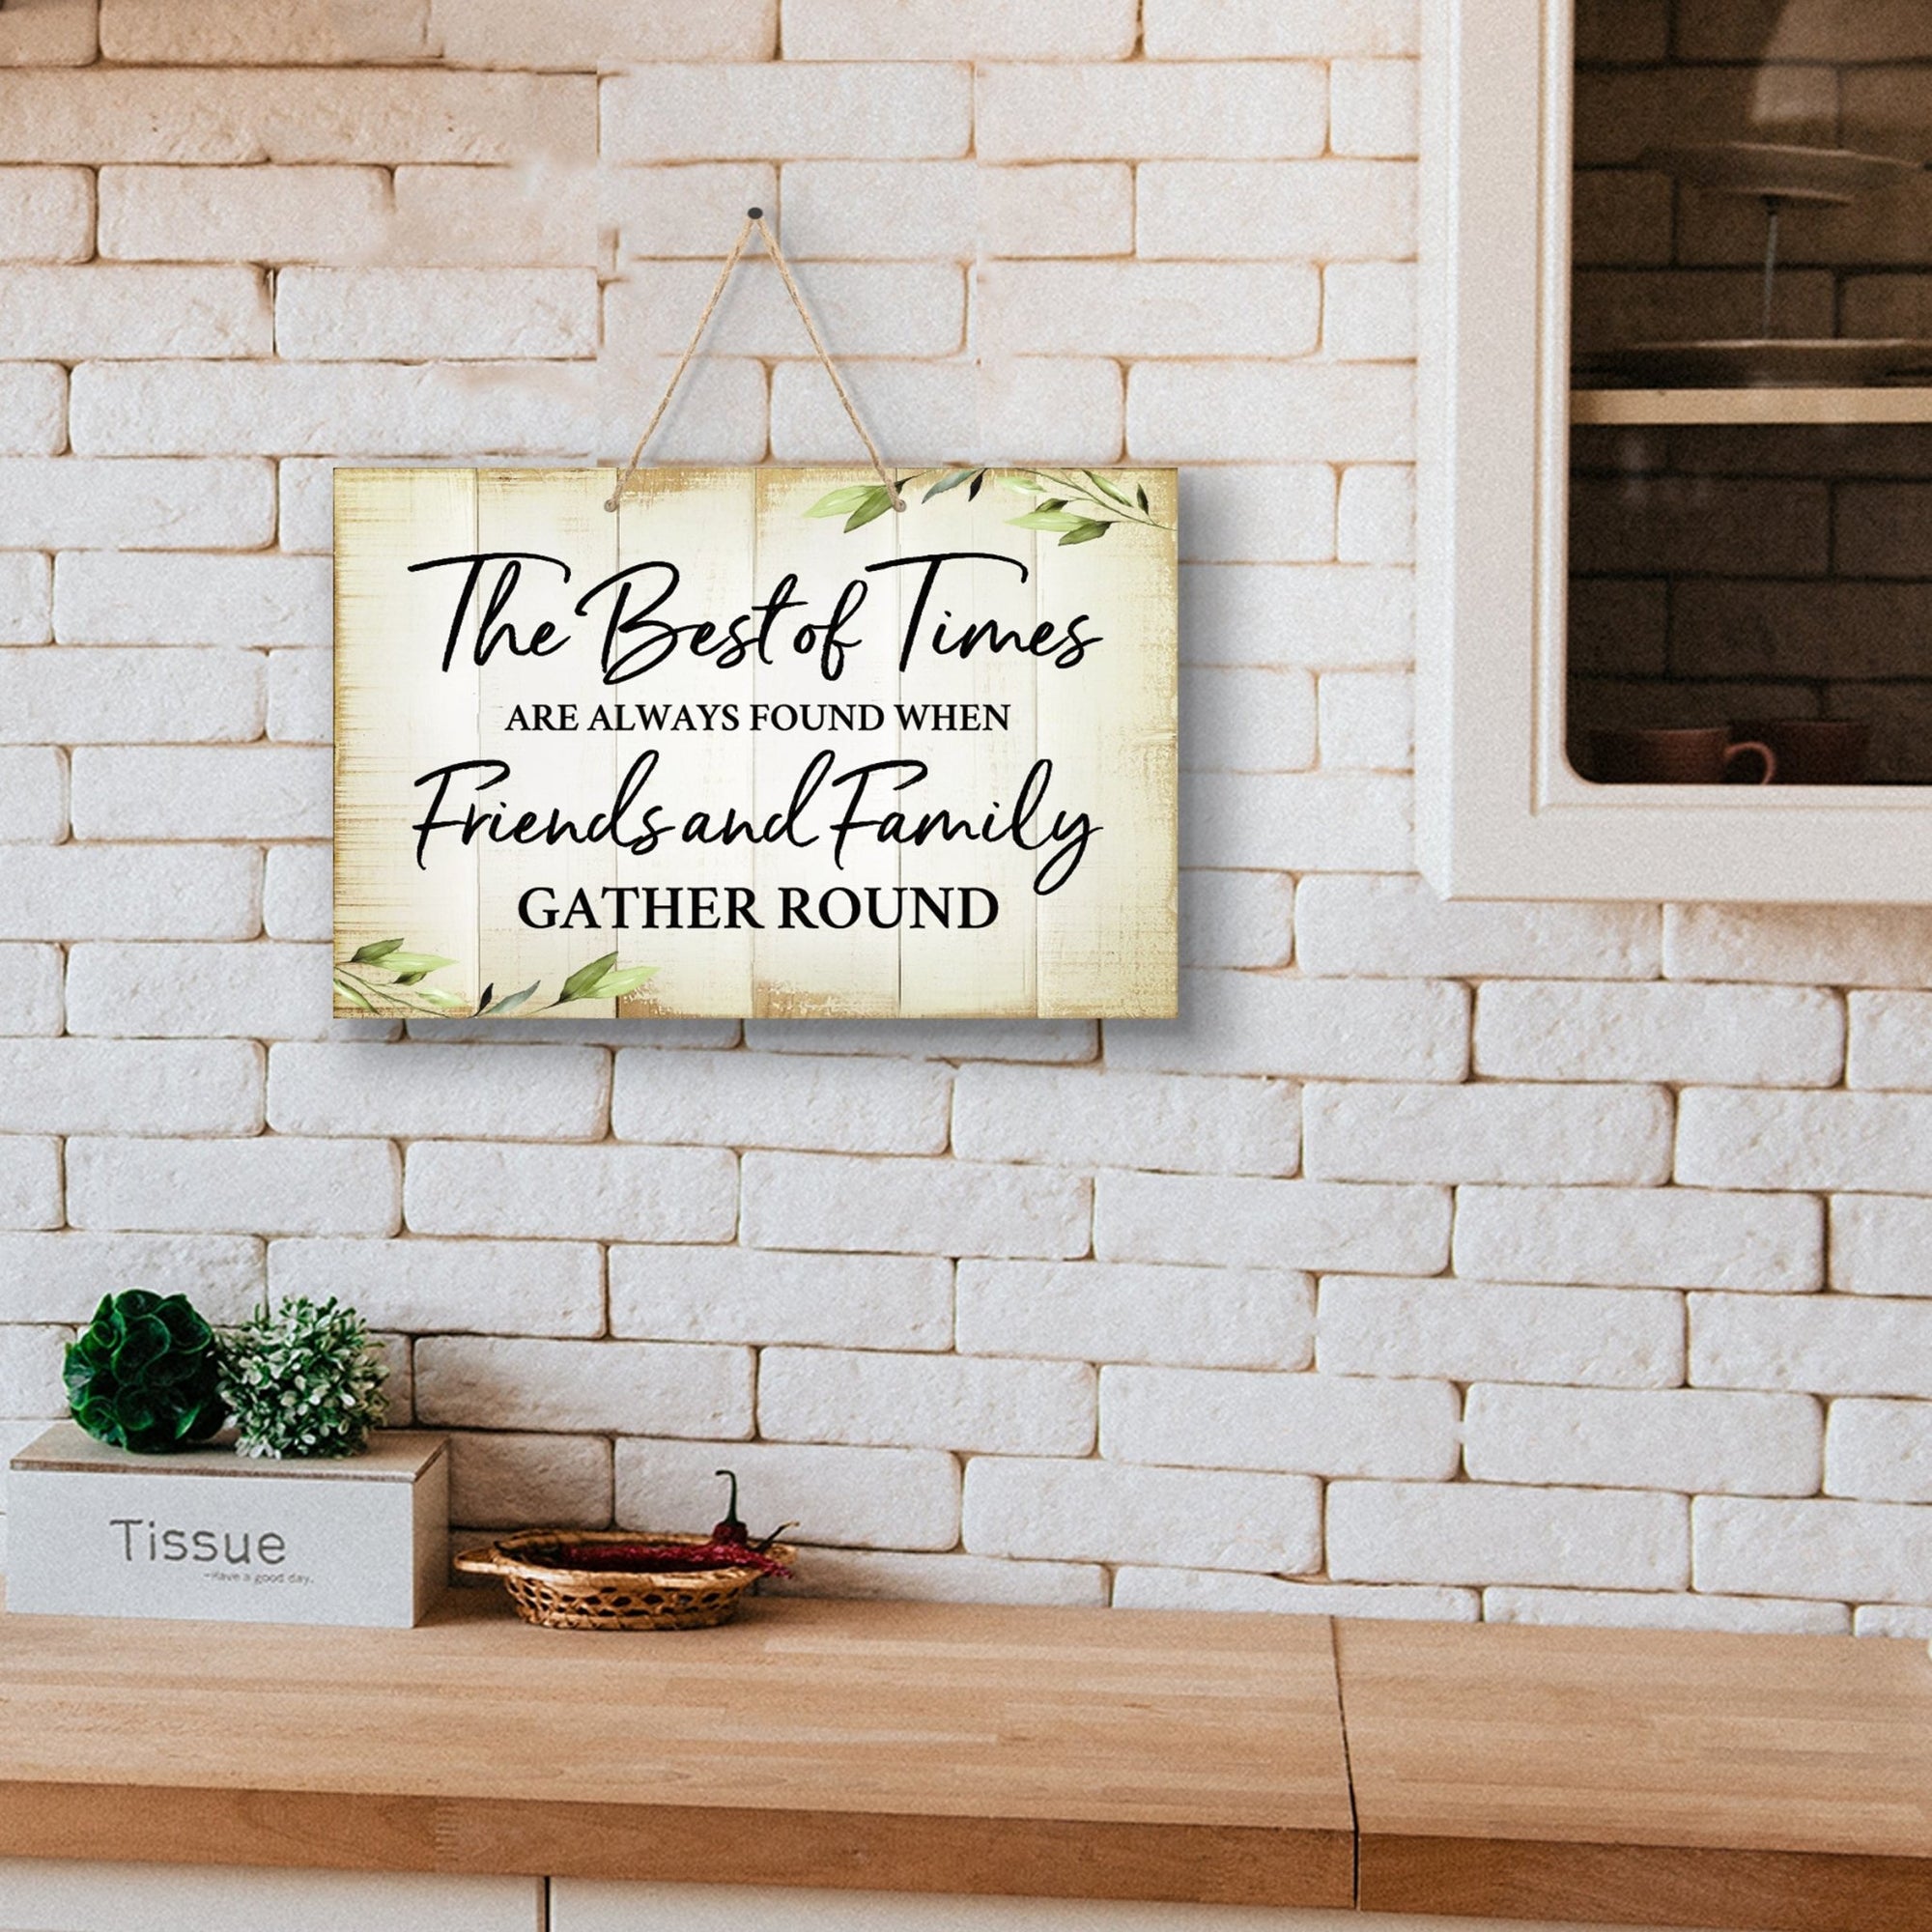 Inspirational Rustic Wooden Wall Hanging Rope Sign Kitchen Décor - The Best Of Times